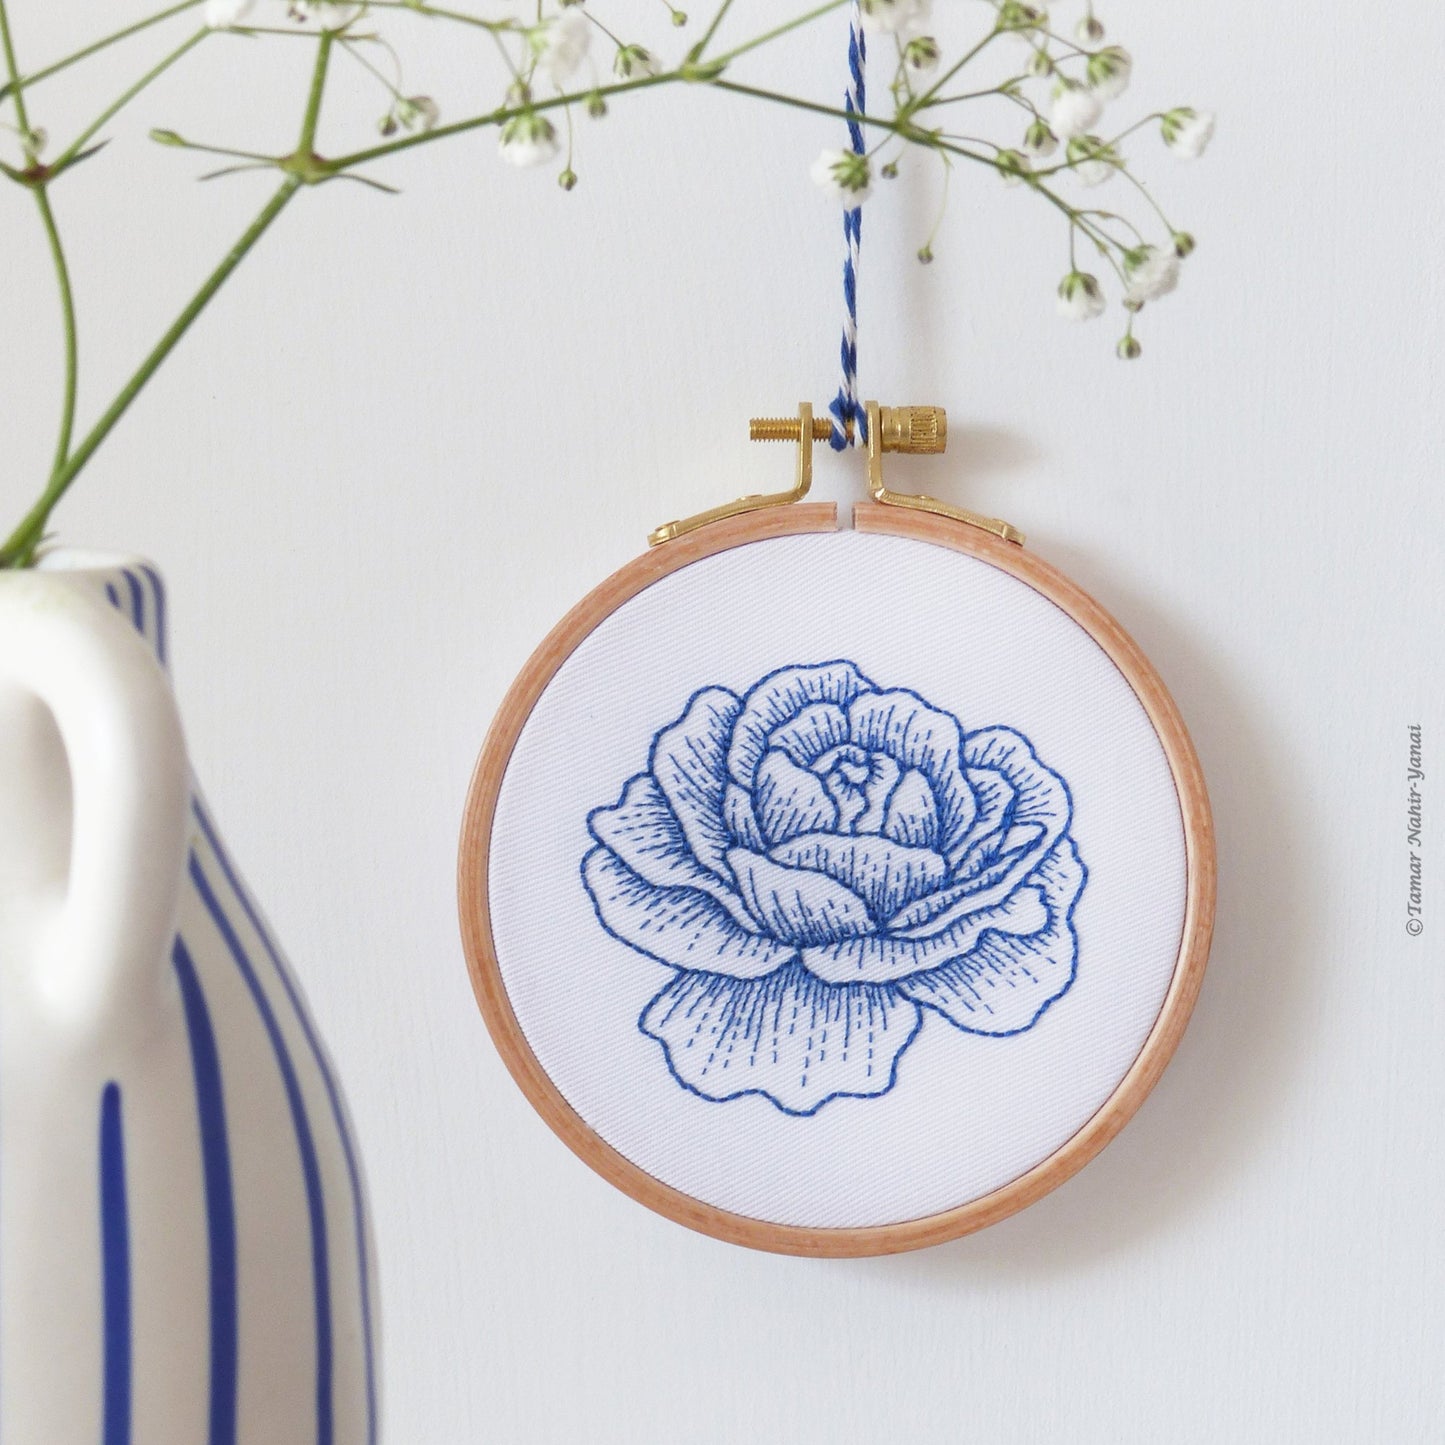 Blue Rose embroidery kit